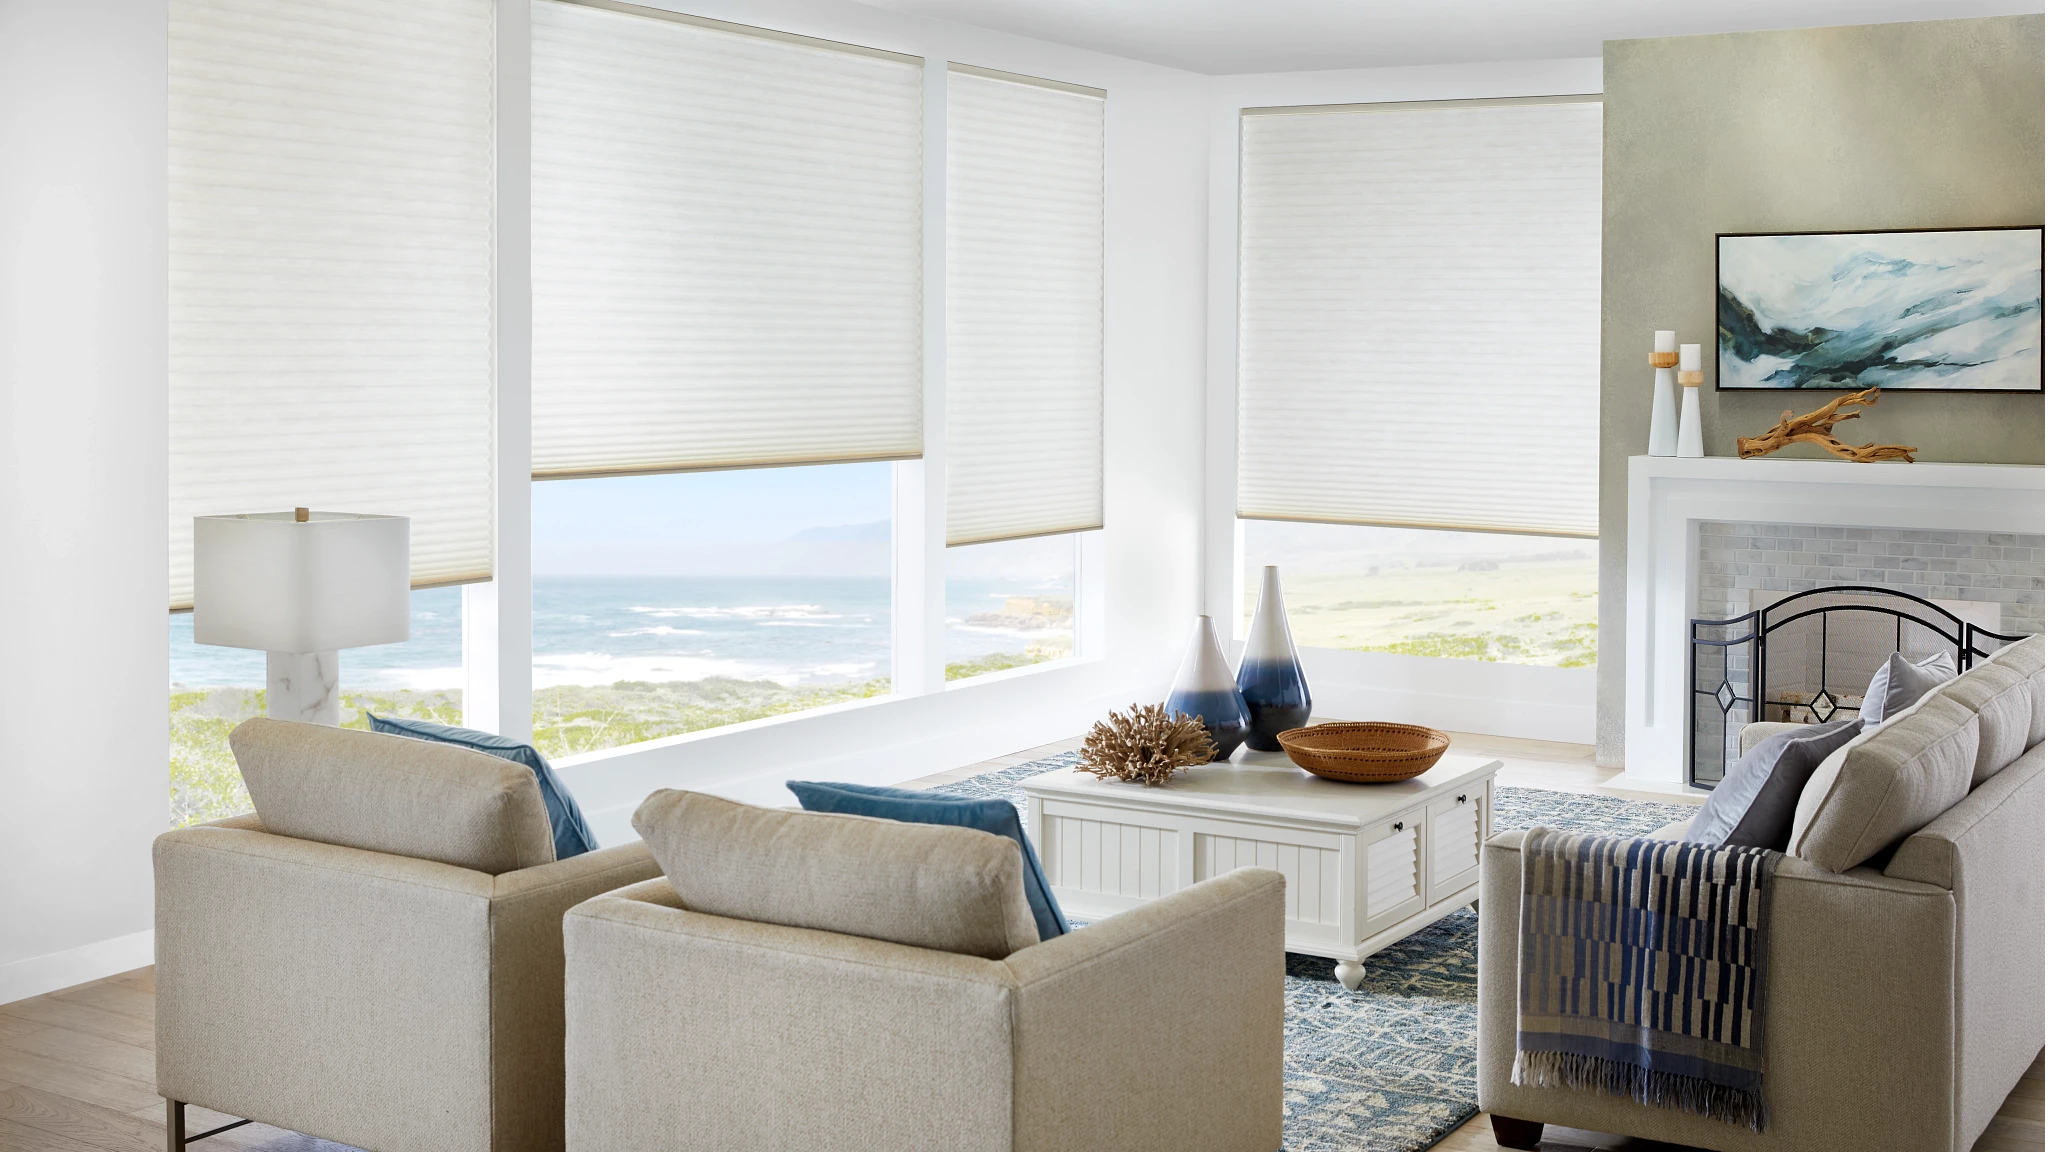 SOMA - Easy to install motors for shades & blinds